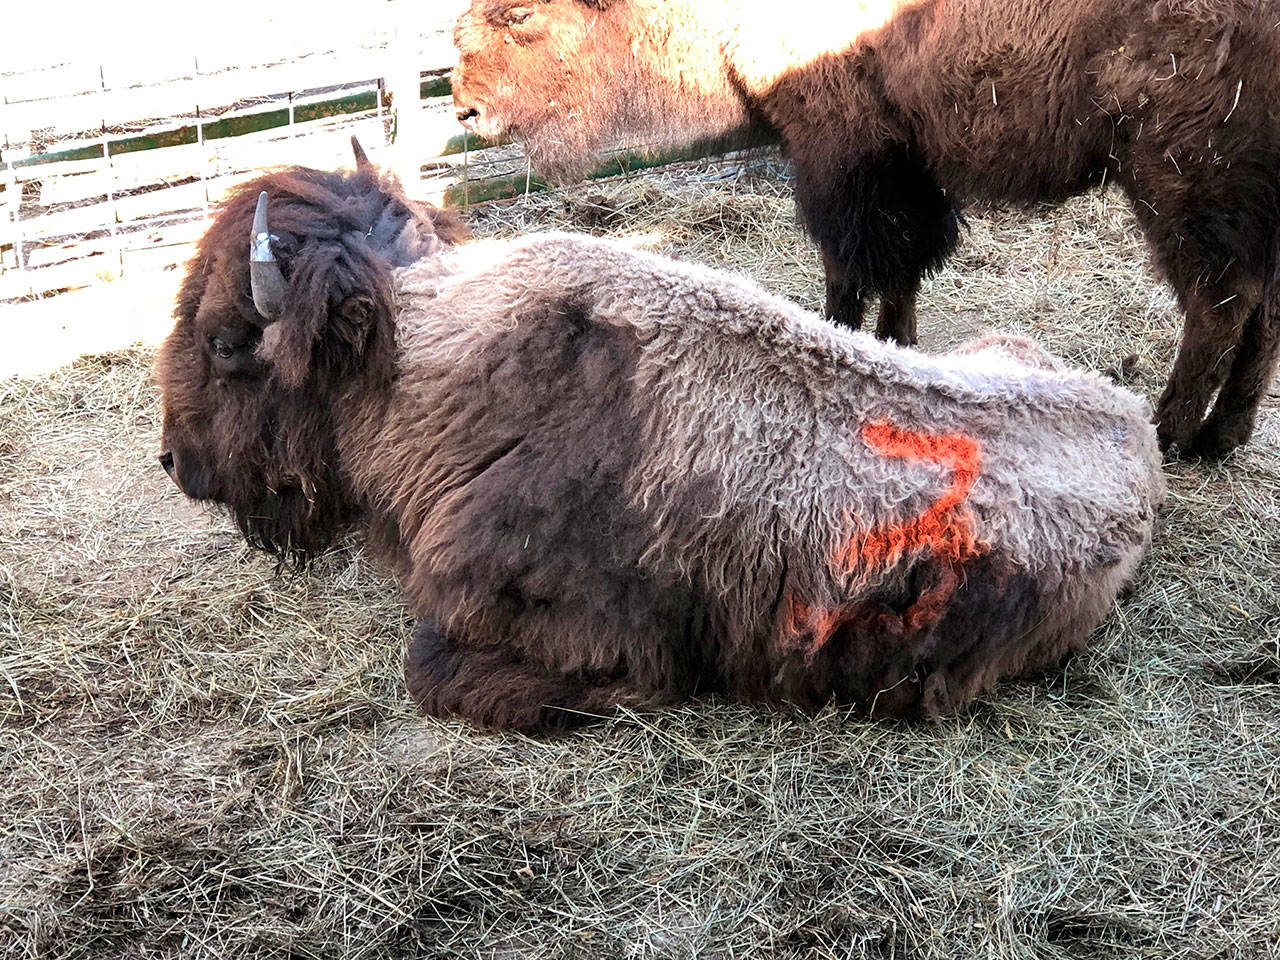 A bison that was rescued from a Chimacum-area property. (Center Valley Animal Rescue)